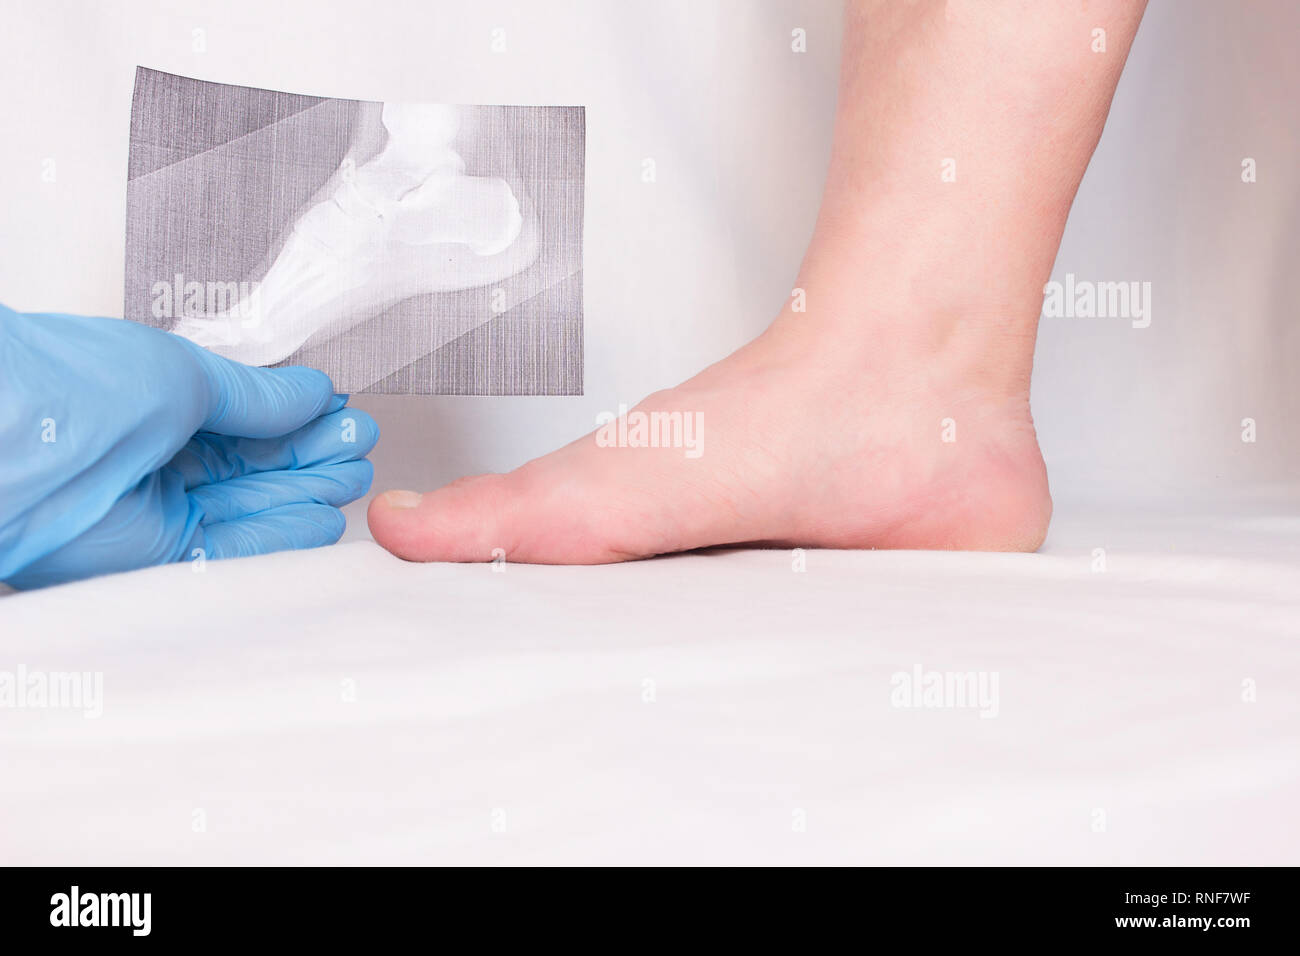 doctor holds x-ray in his hand and examines patient's leg with heel spur, close-up, plantar fasciitis, medical gloves Stock Photo